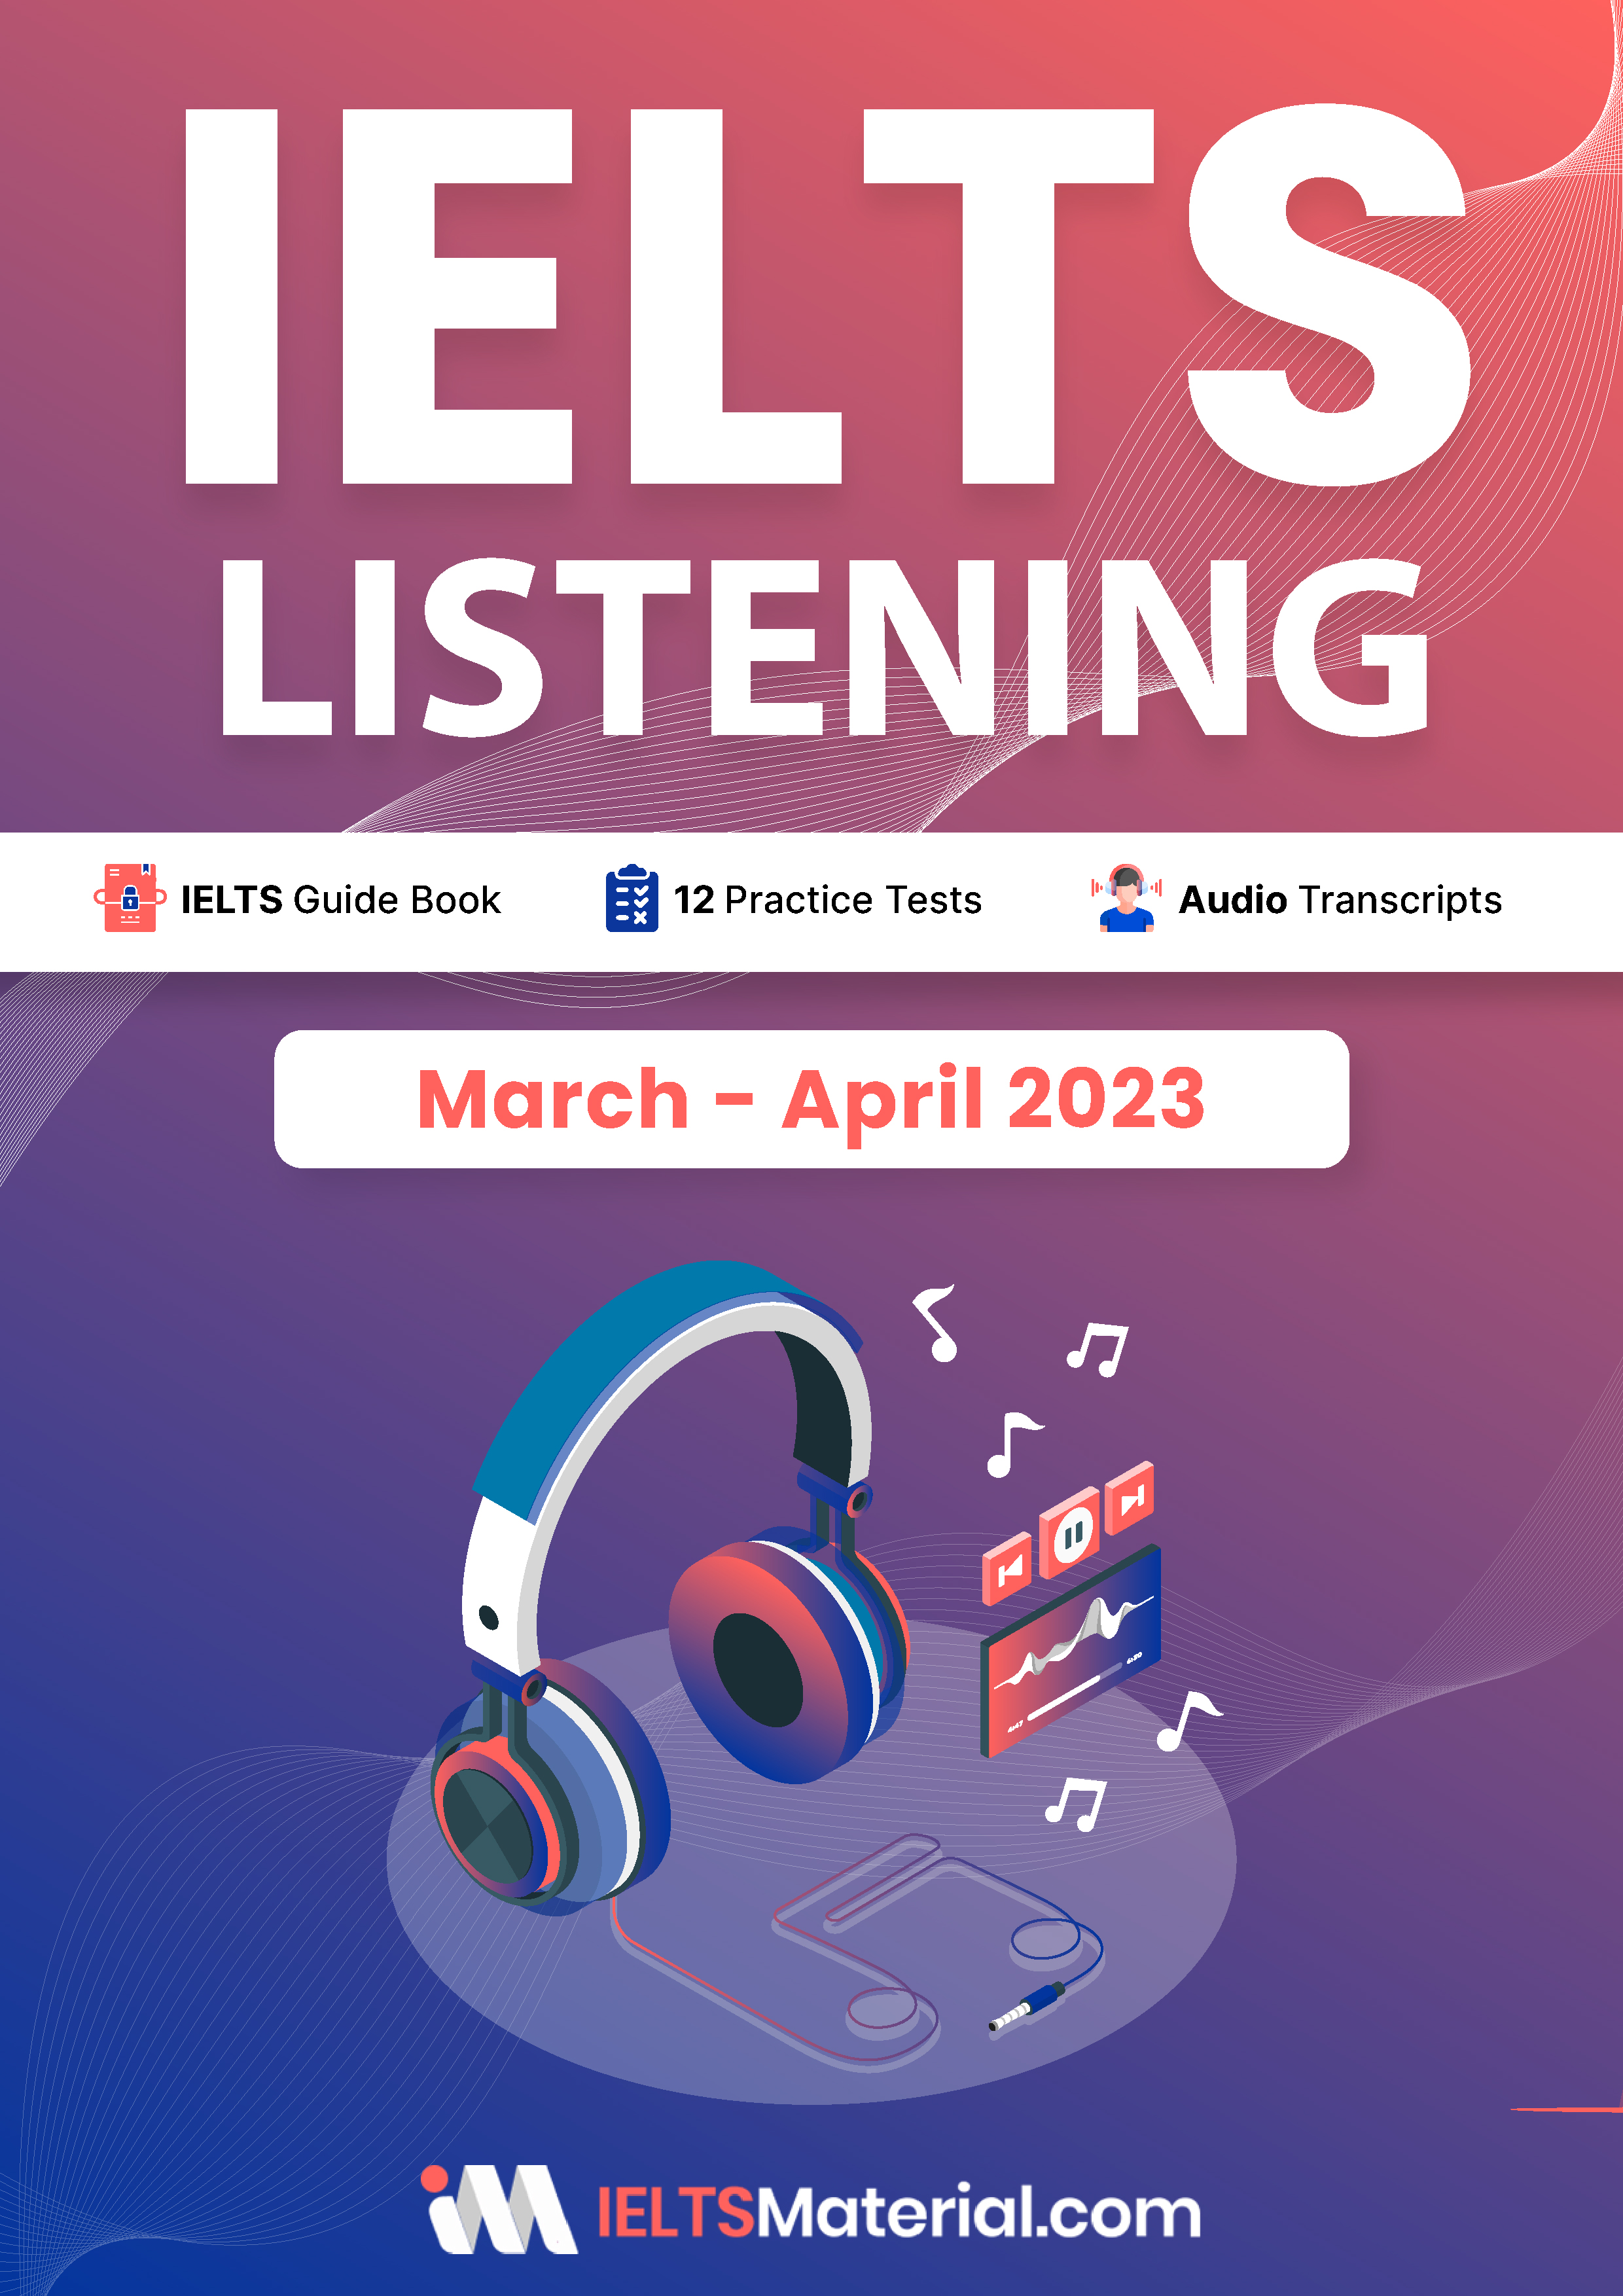 IELTS Reading General: Learner’s Kit: Actual Tests eBook Combo (March-April 2023)